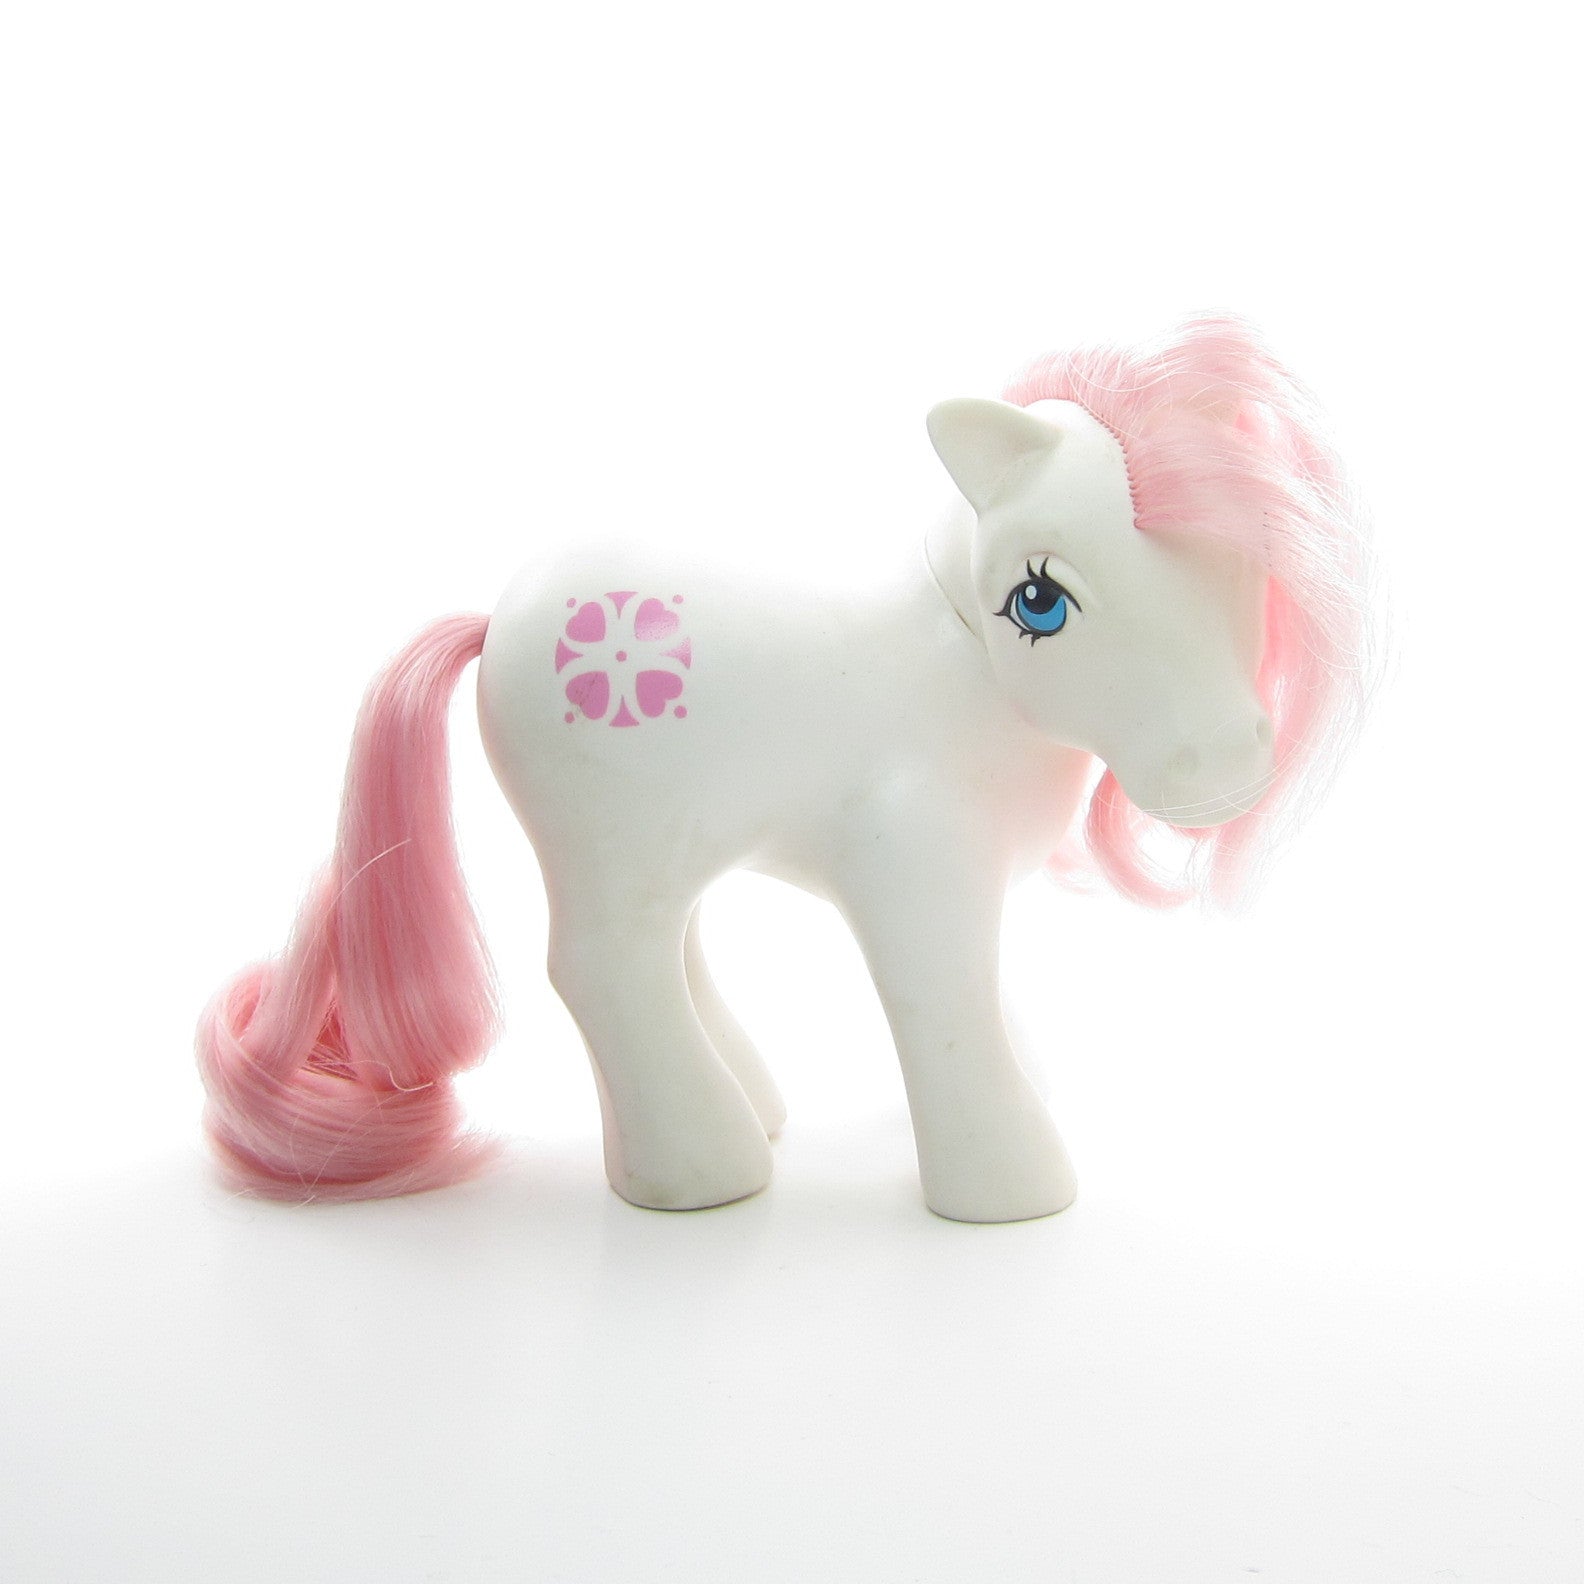 Sundance My Little Pony with white body, pink hair